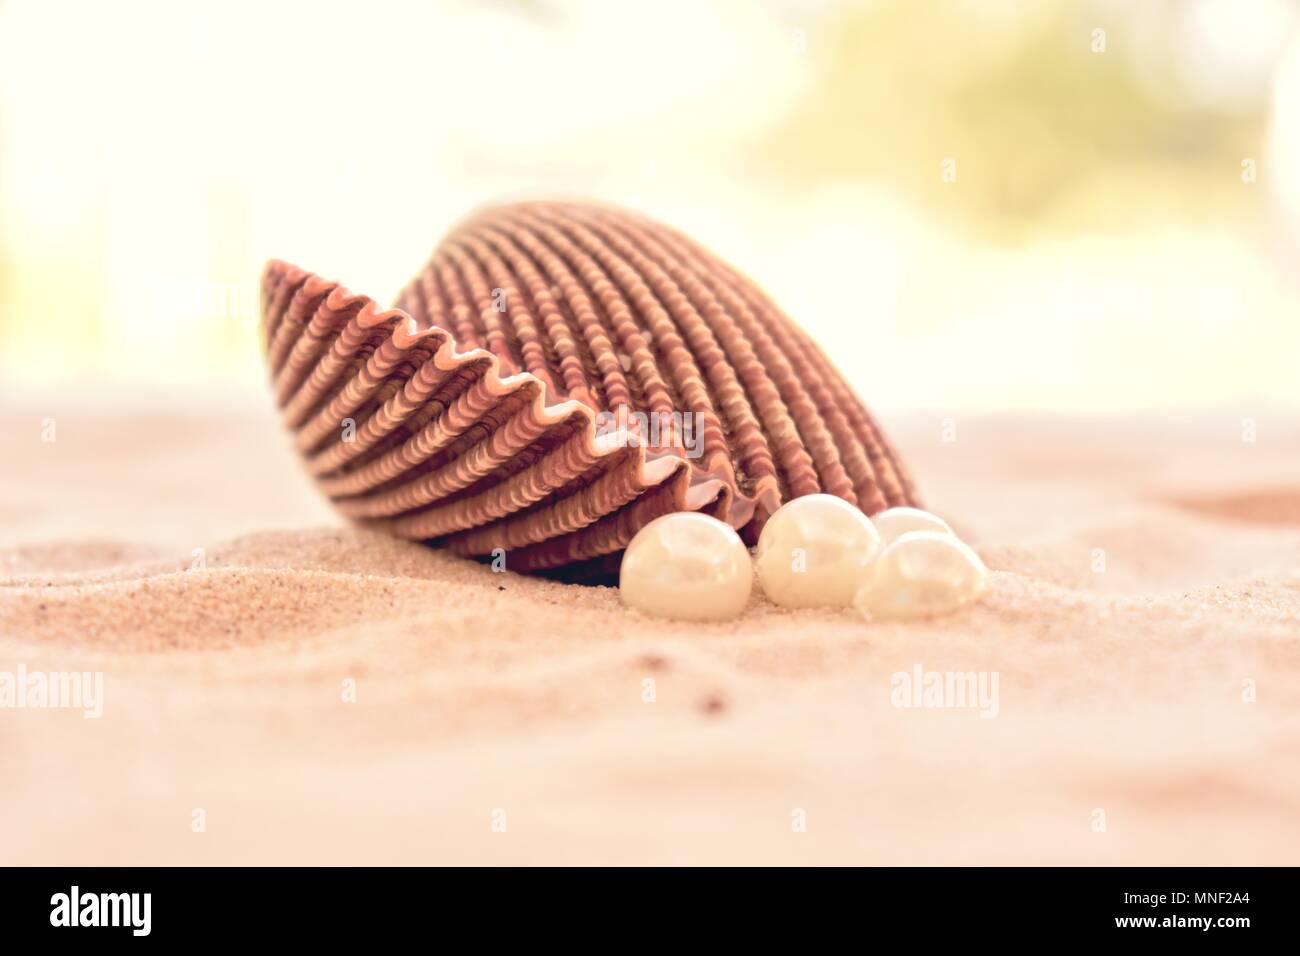 Cockle shell with pearls on a sandy beach Stock Photo